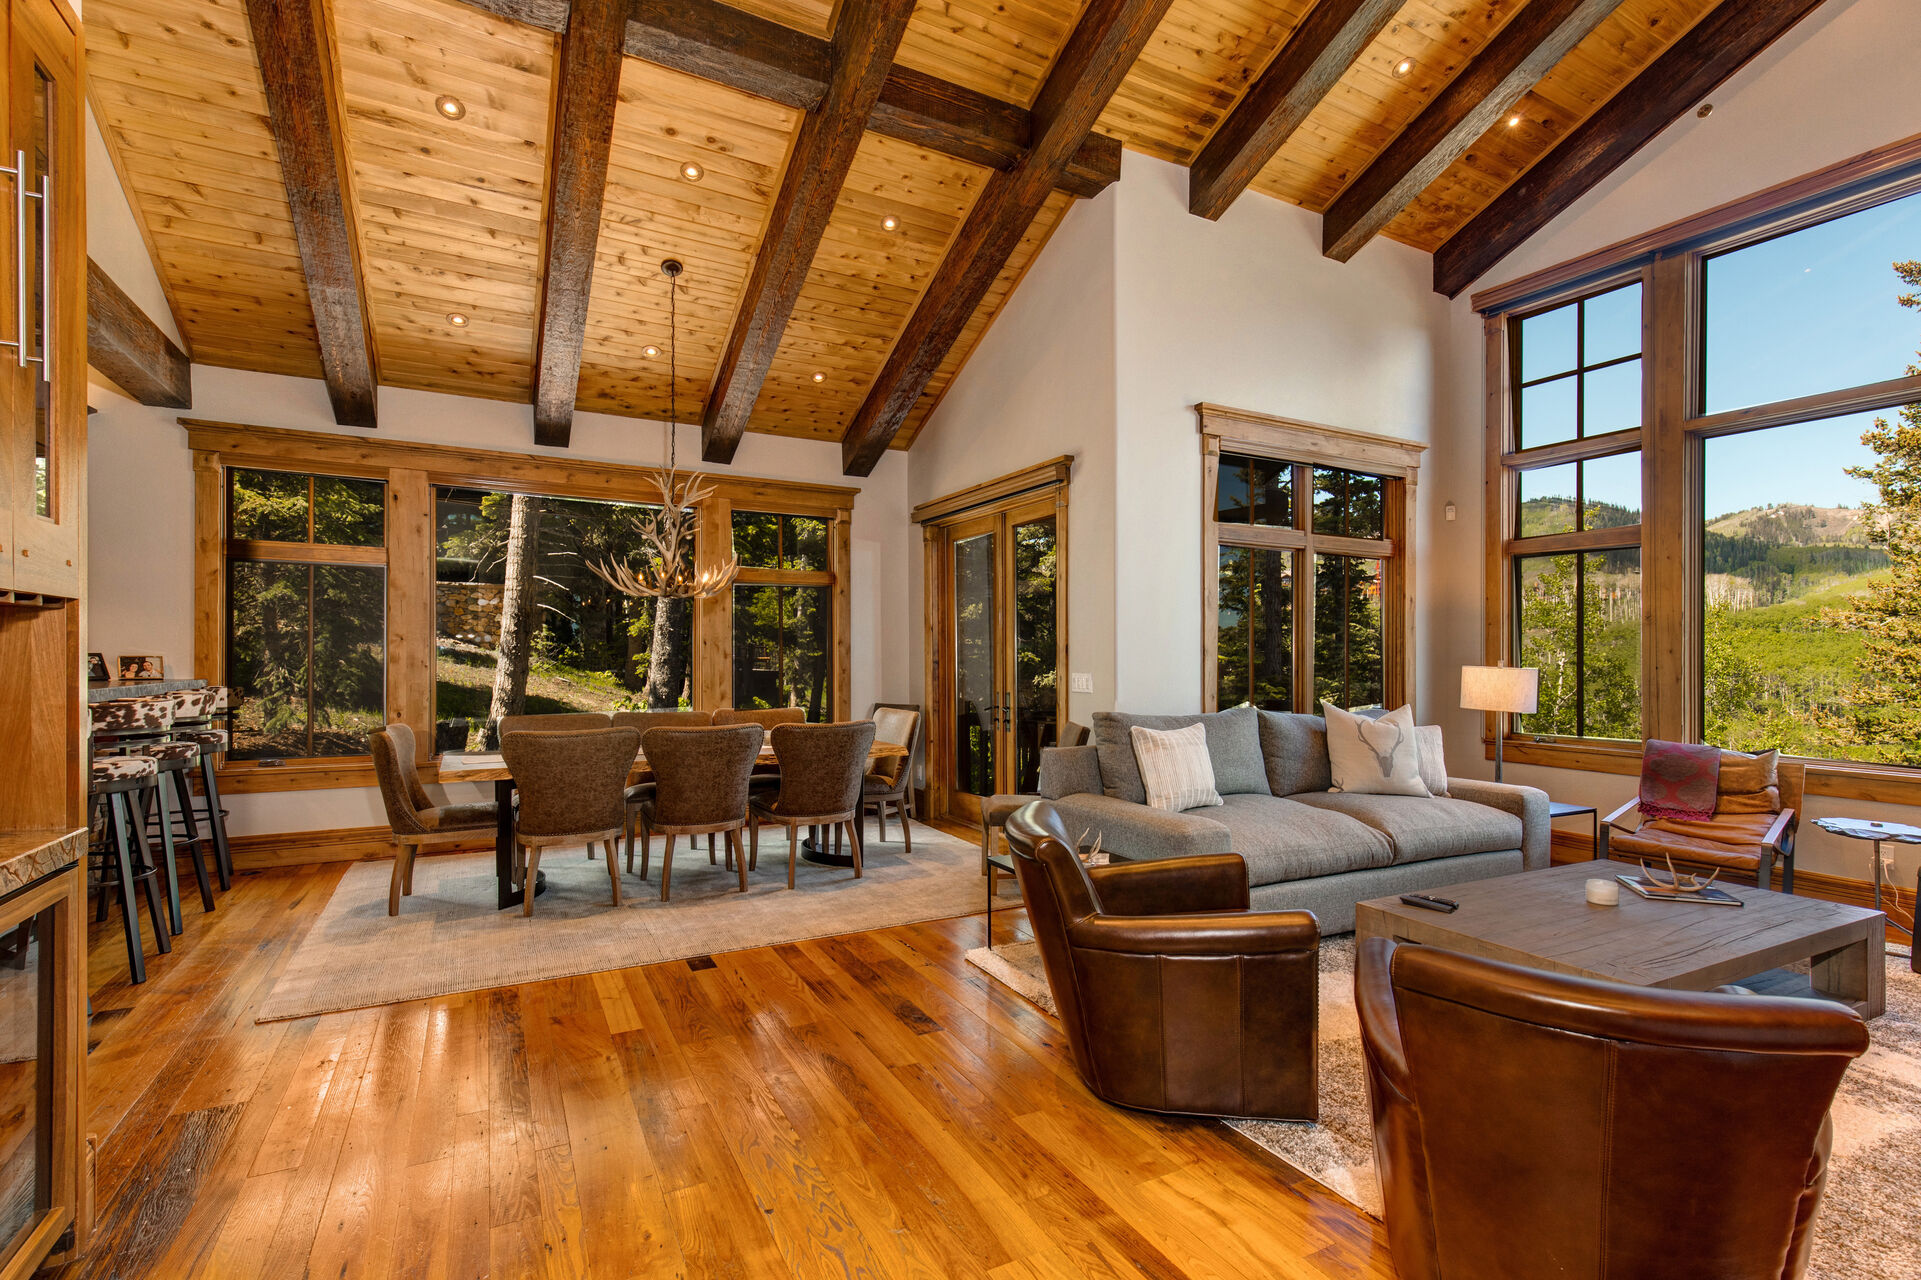 Upper Level Living Room with Fireplace and Deck Access, Beautiful Views out Large Windows